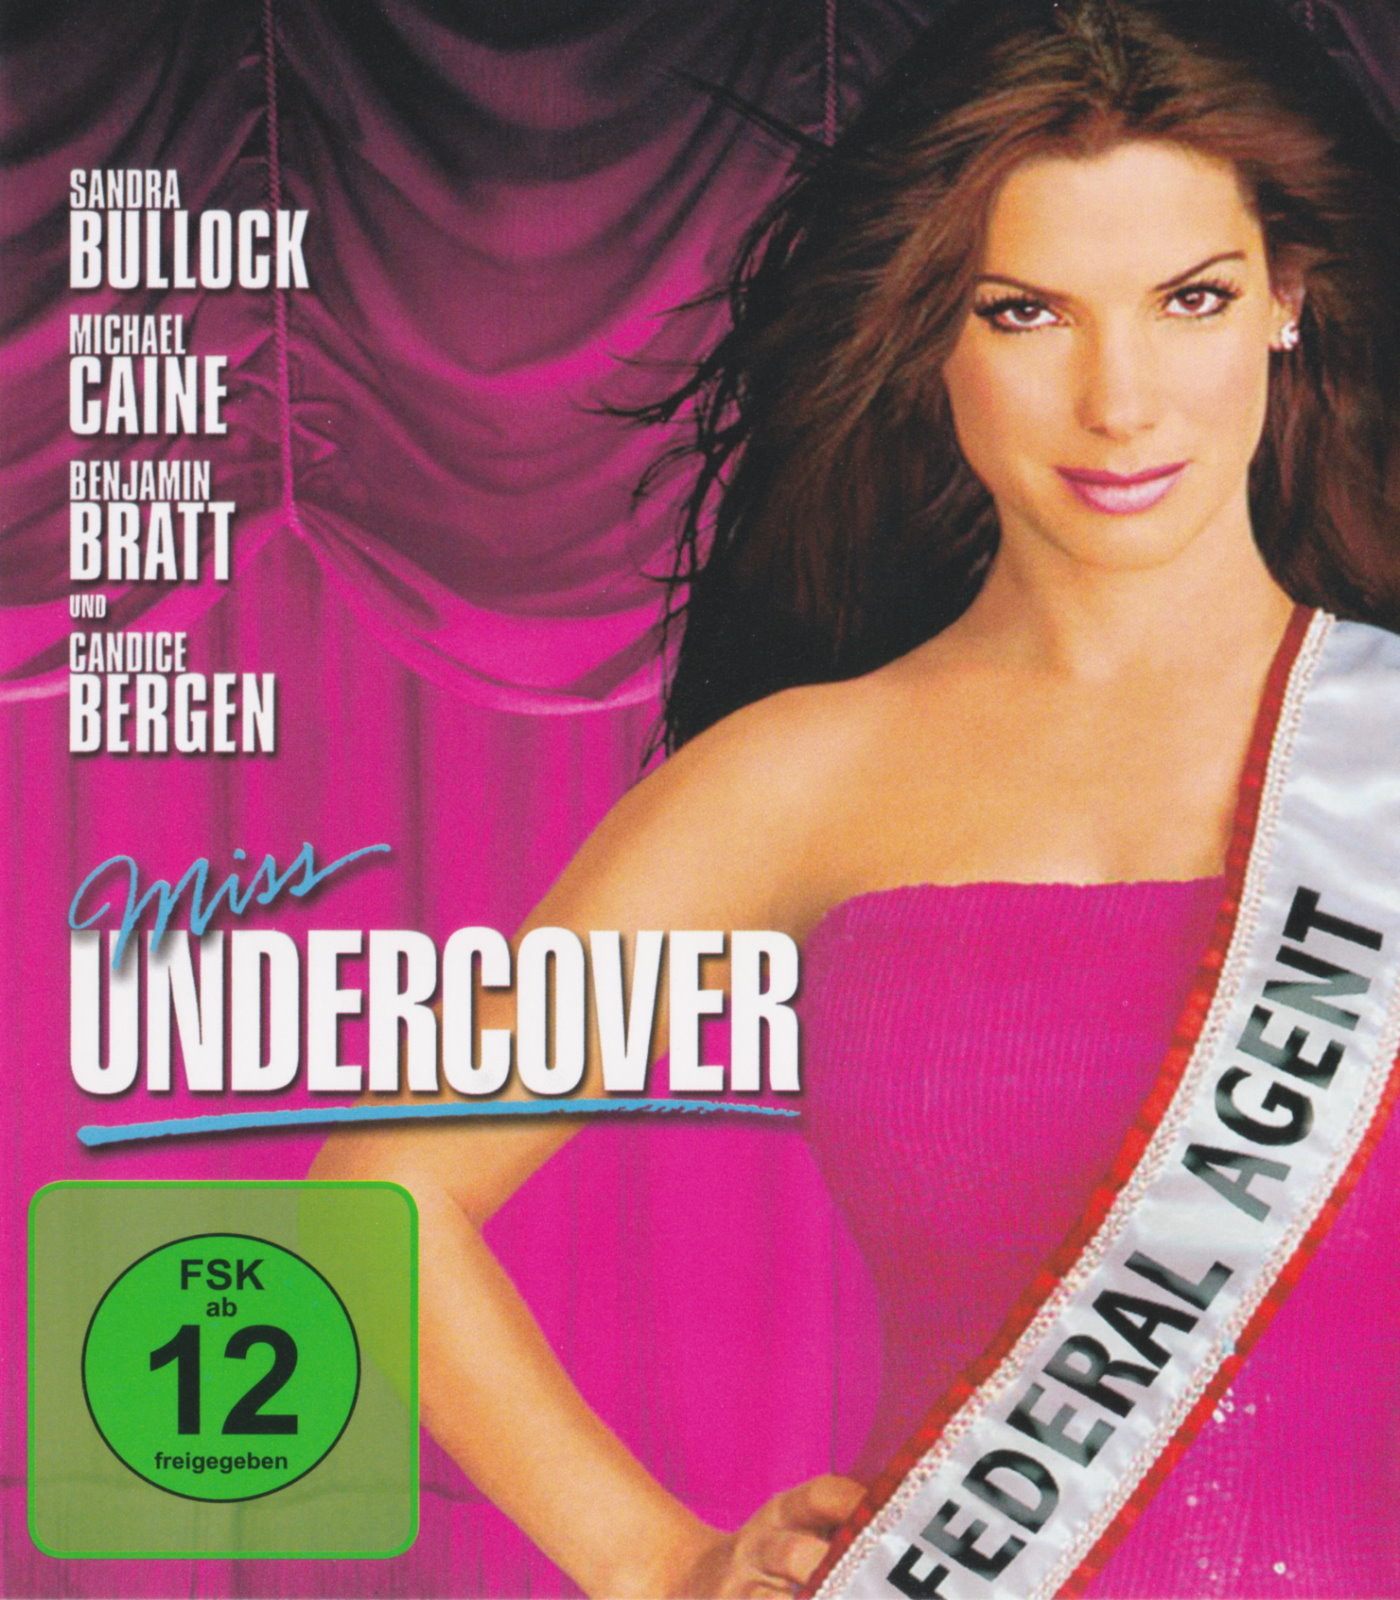 Cover - Miss Undercover.jpg